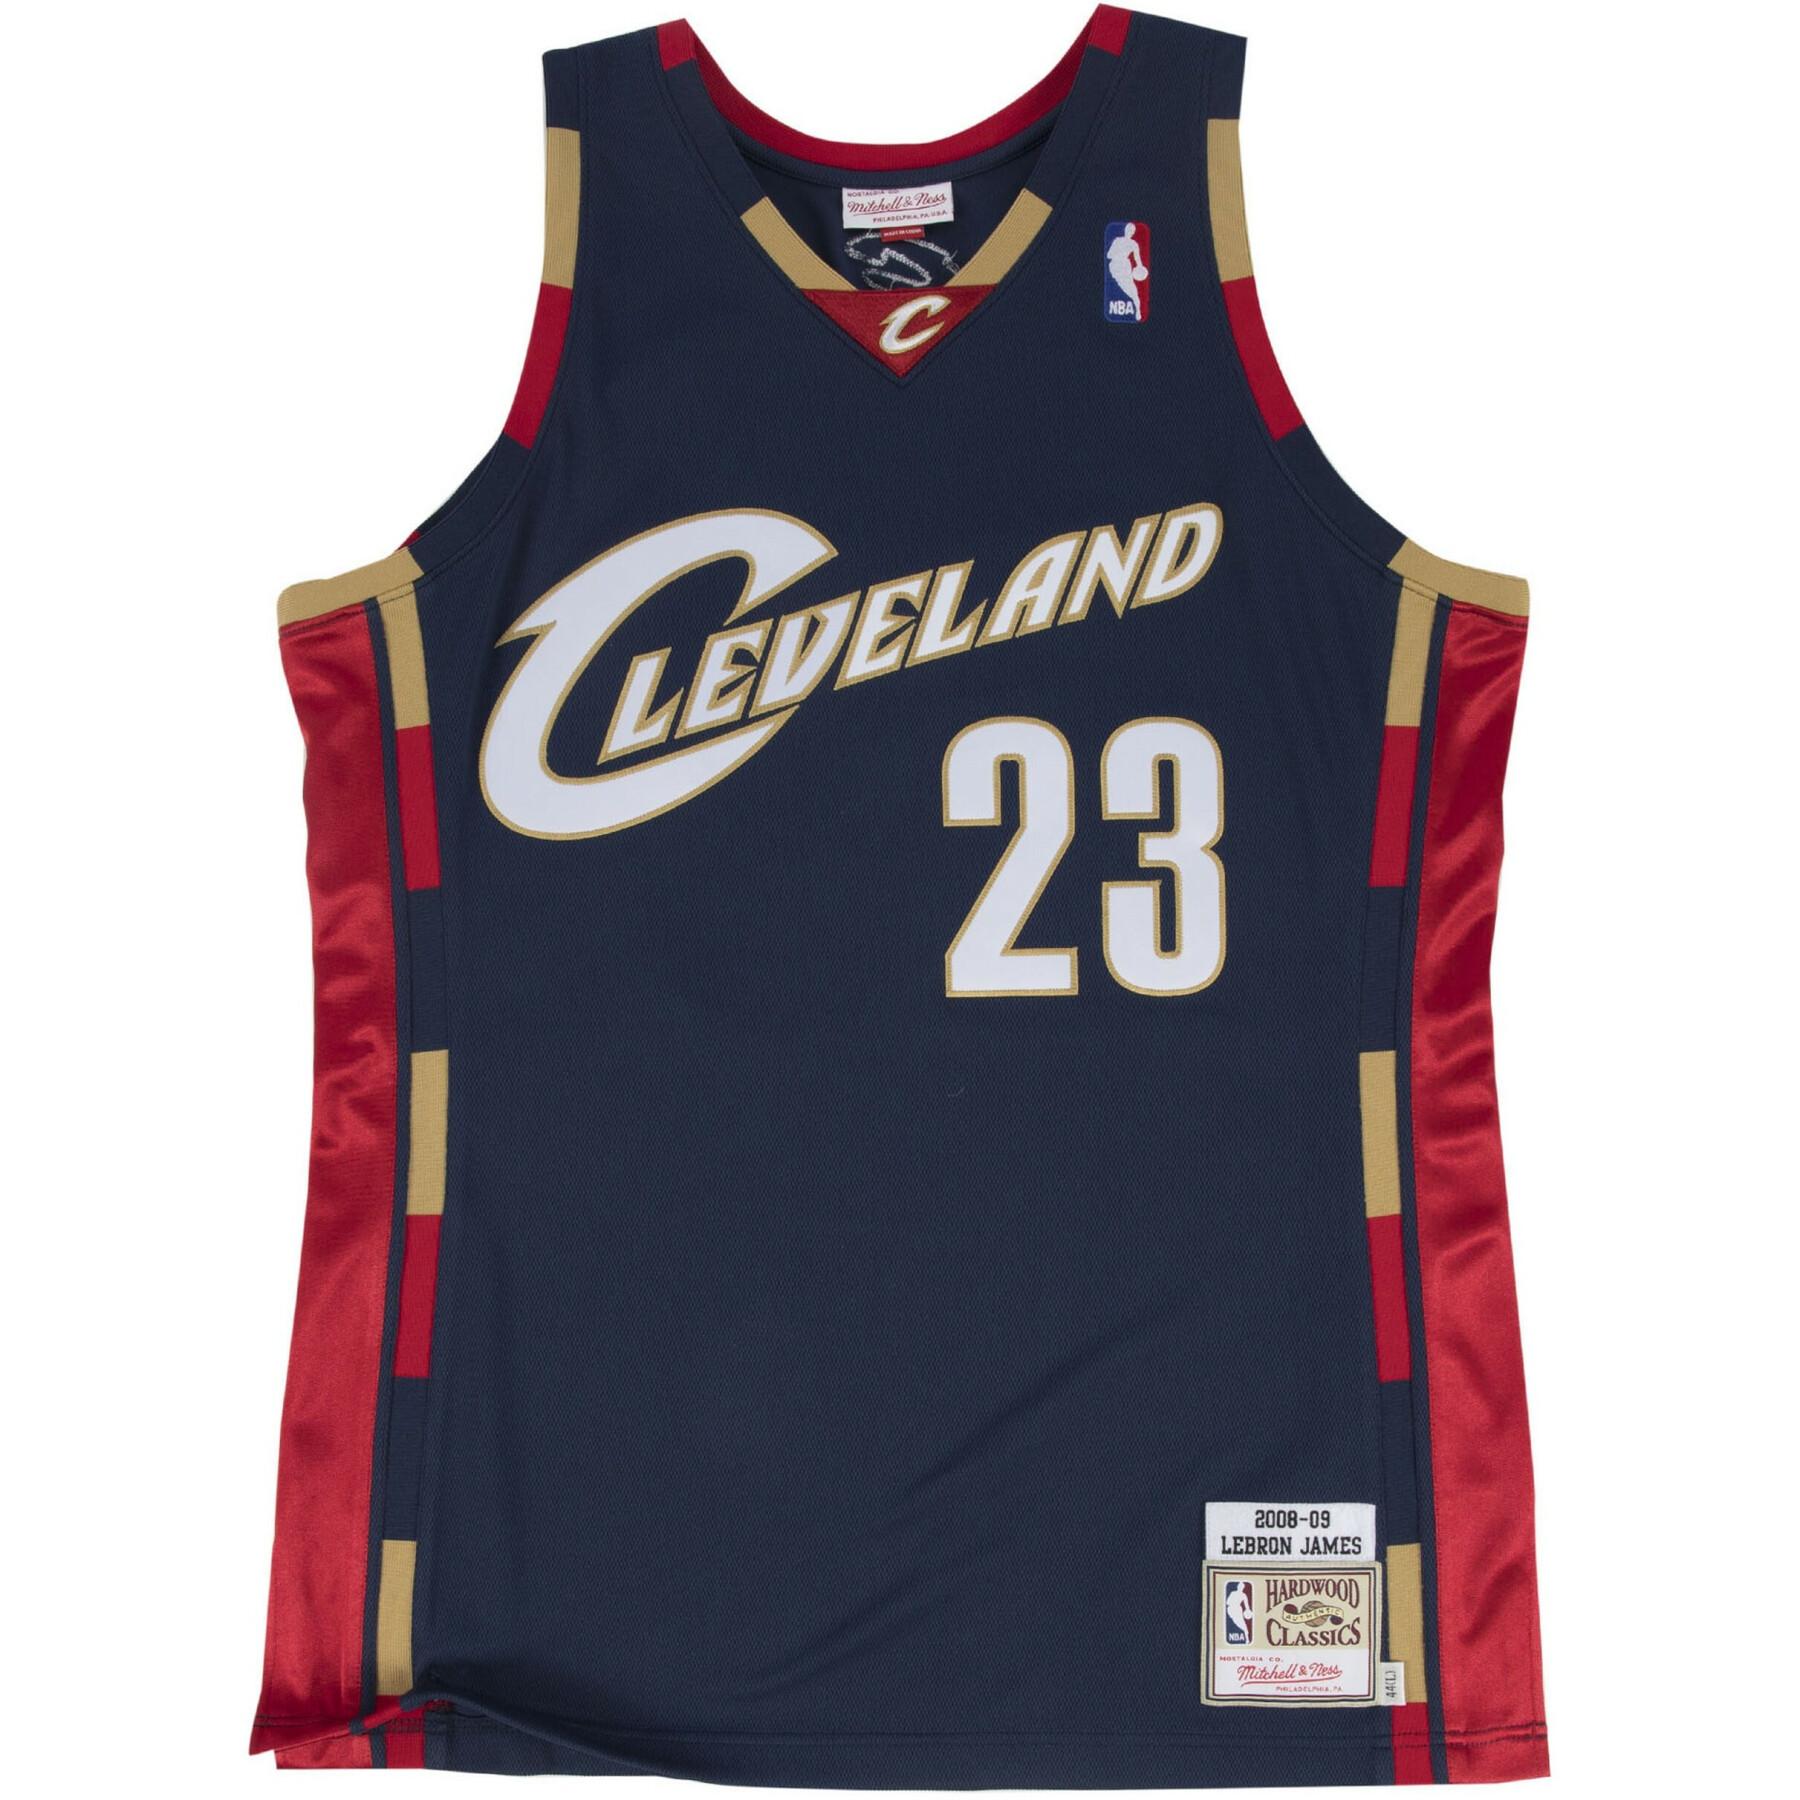 Camisola Cleveland Cavaliers nba authentic